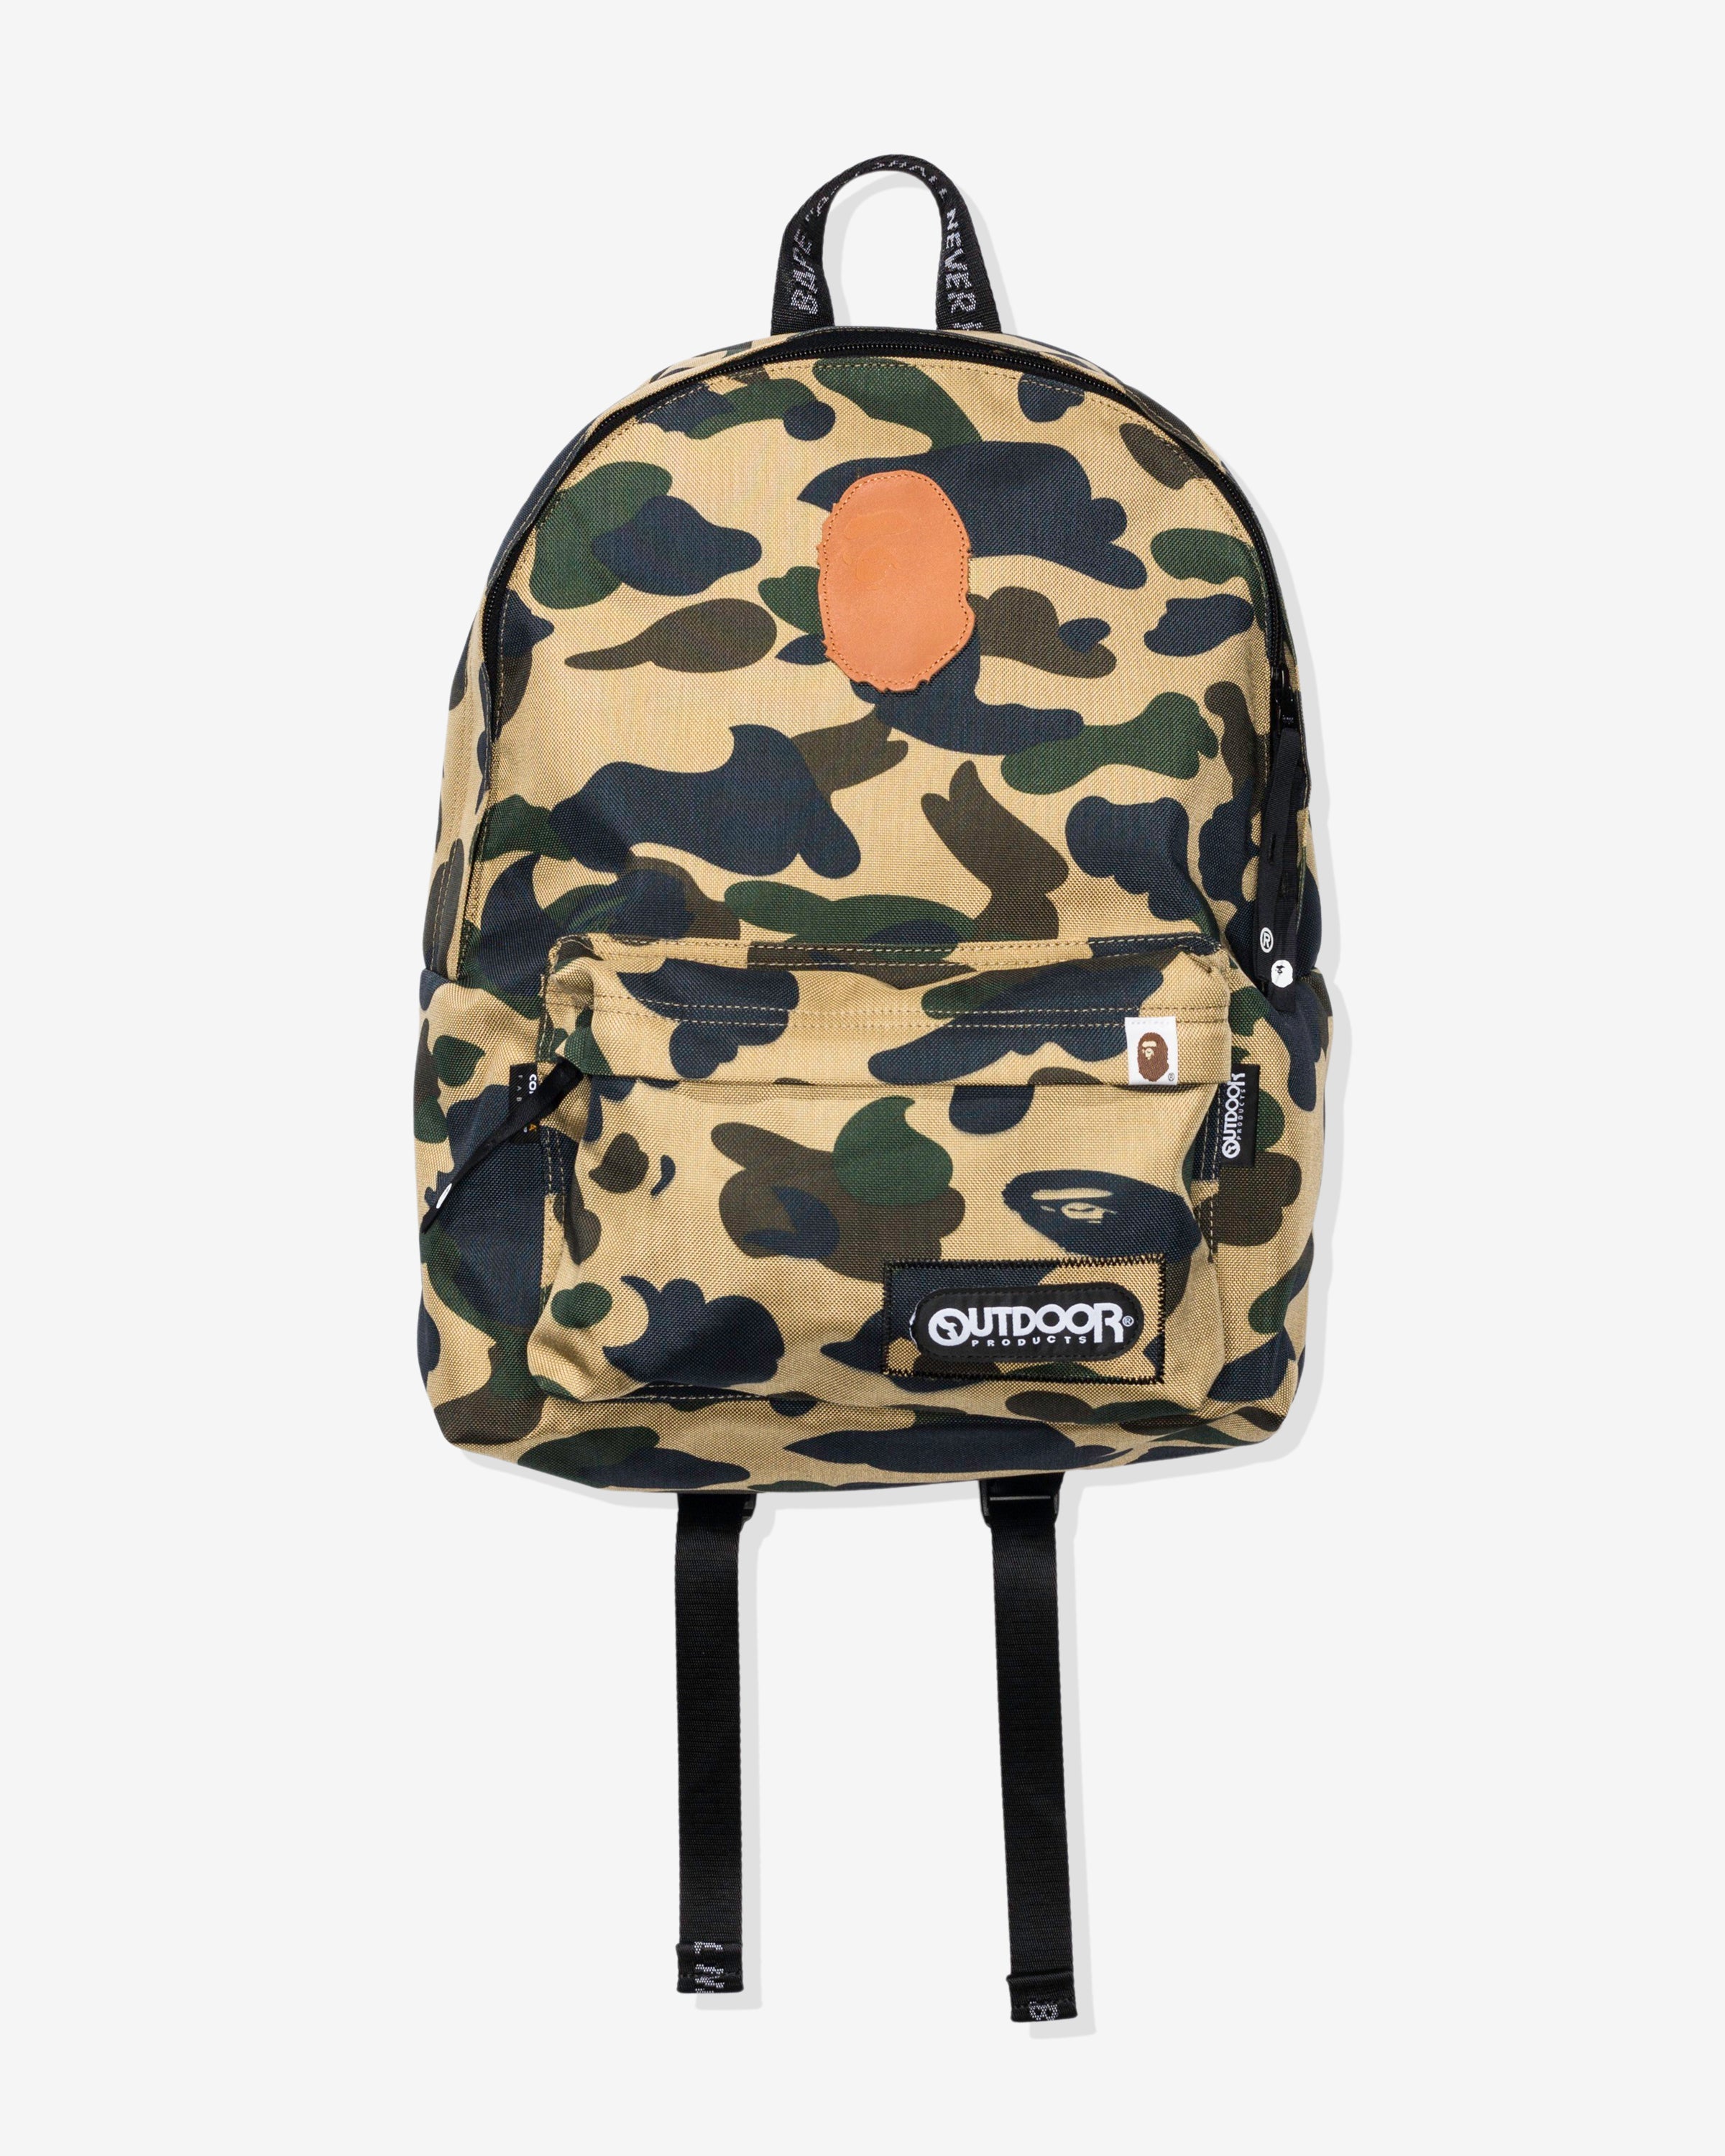 BAPE X OUTDOOR PRODUCTS 1ST CAMO DAY PACK - YELLOW